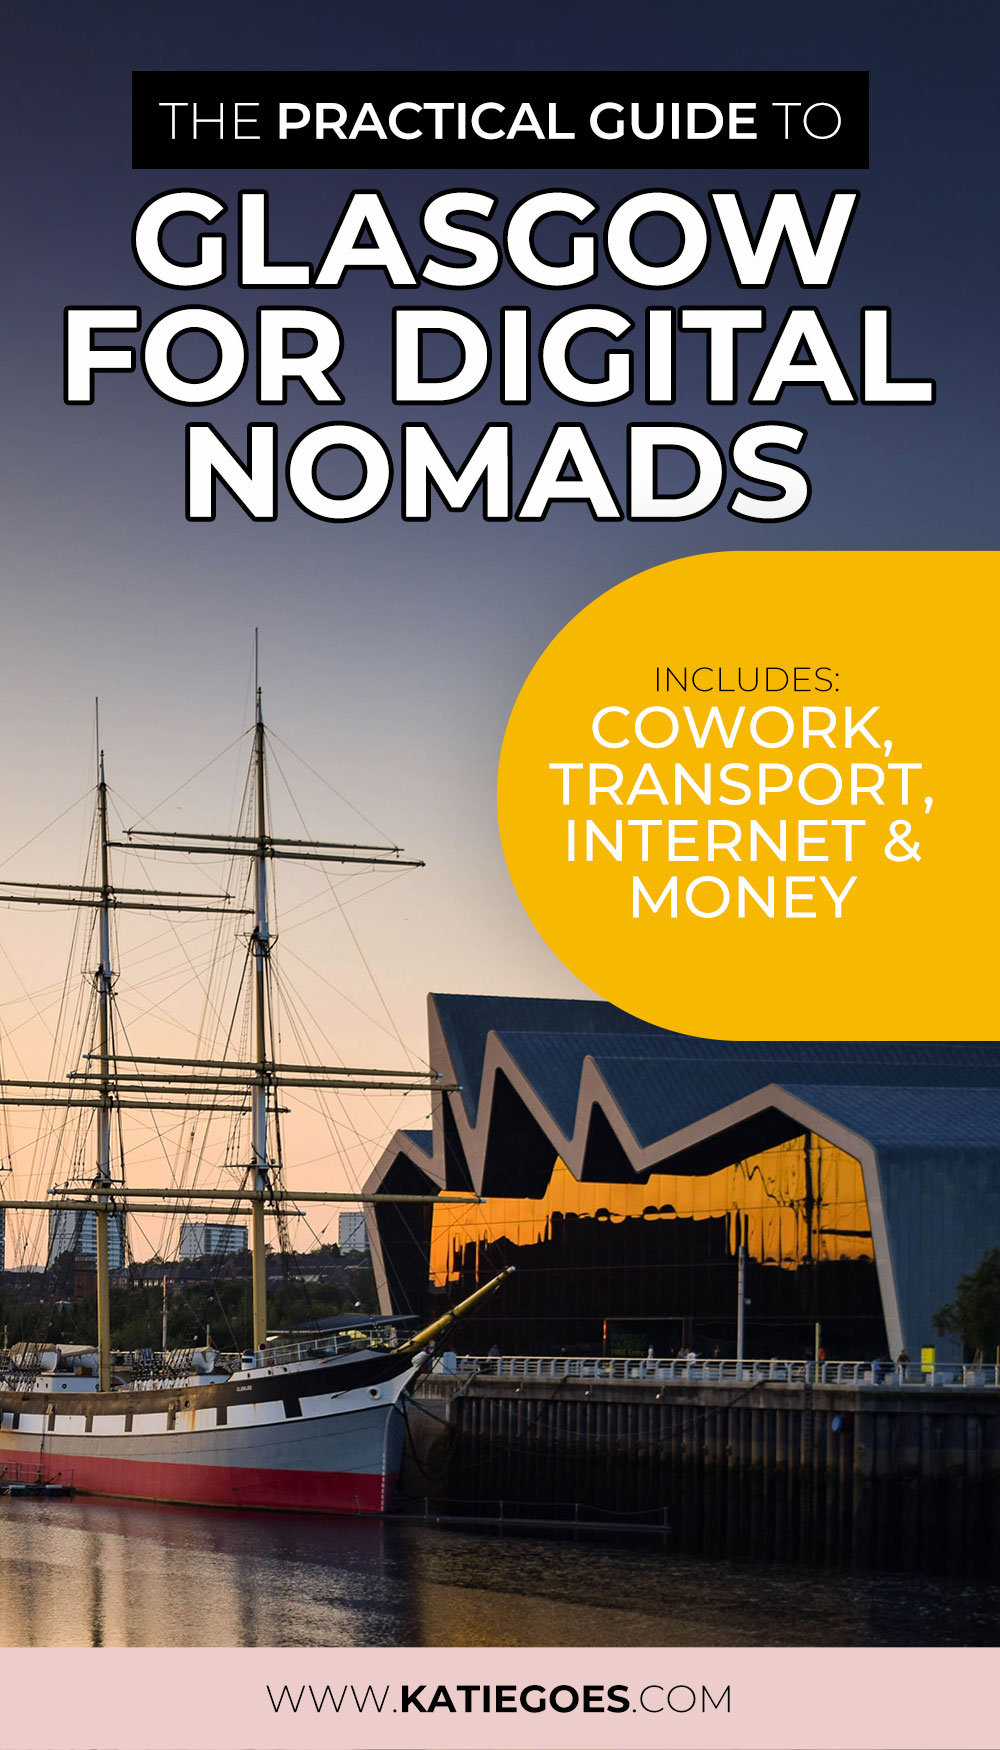 The Practical Guide to Glasgow for Digital Nomads